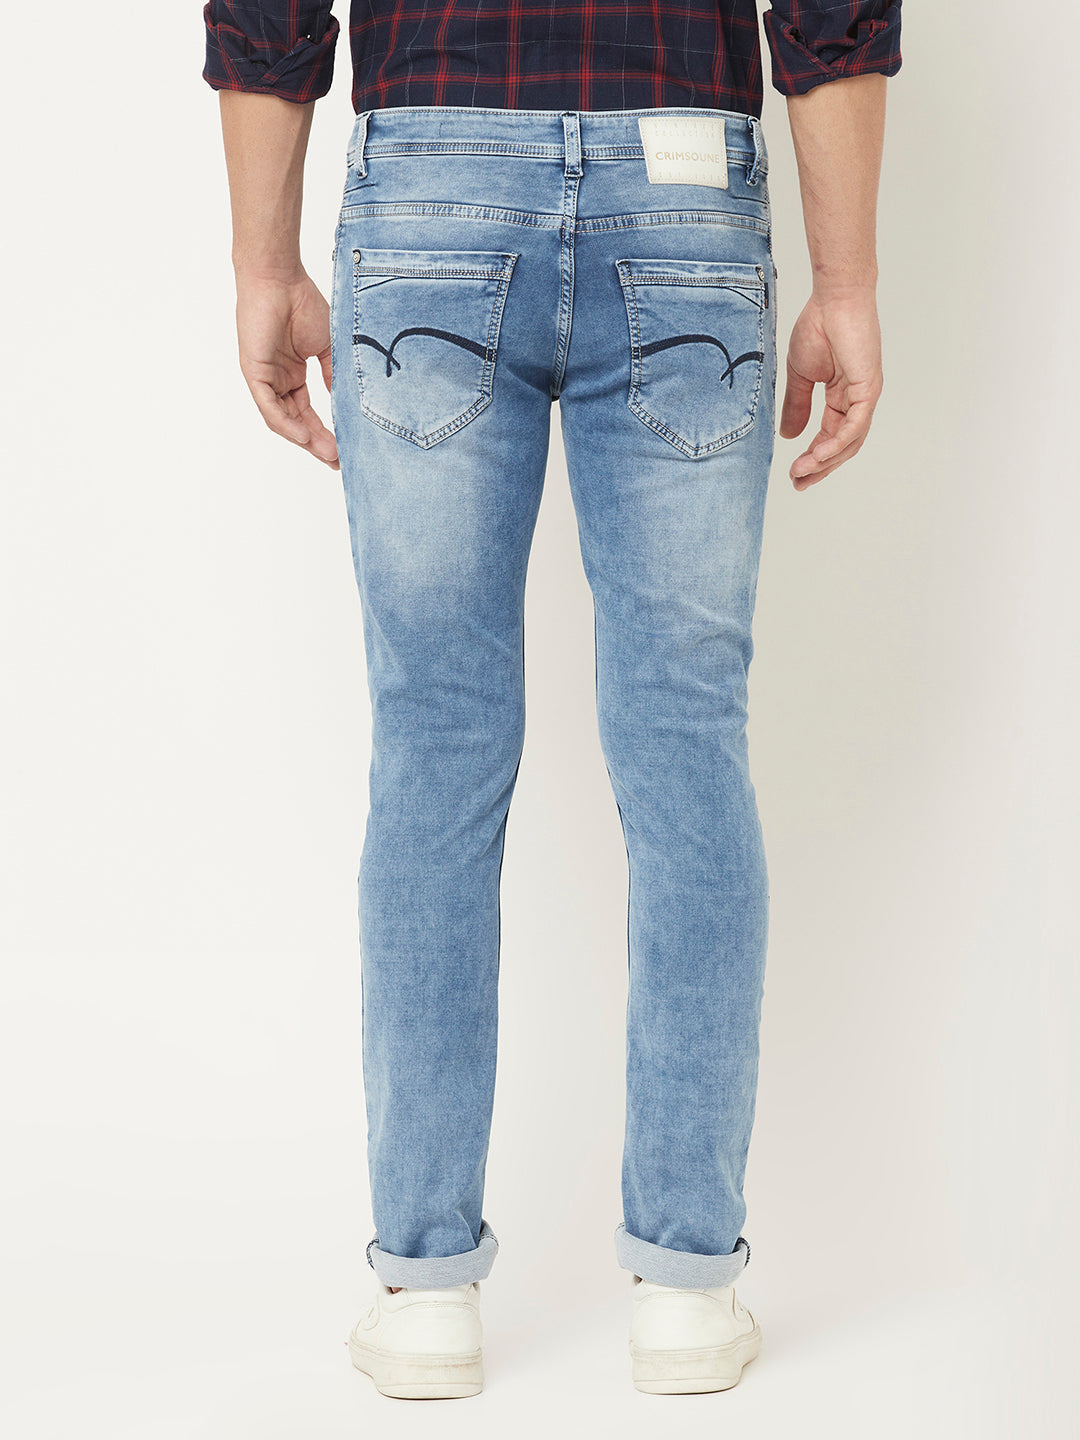  Light Blue Jeans with 5 Pocket Styling 